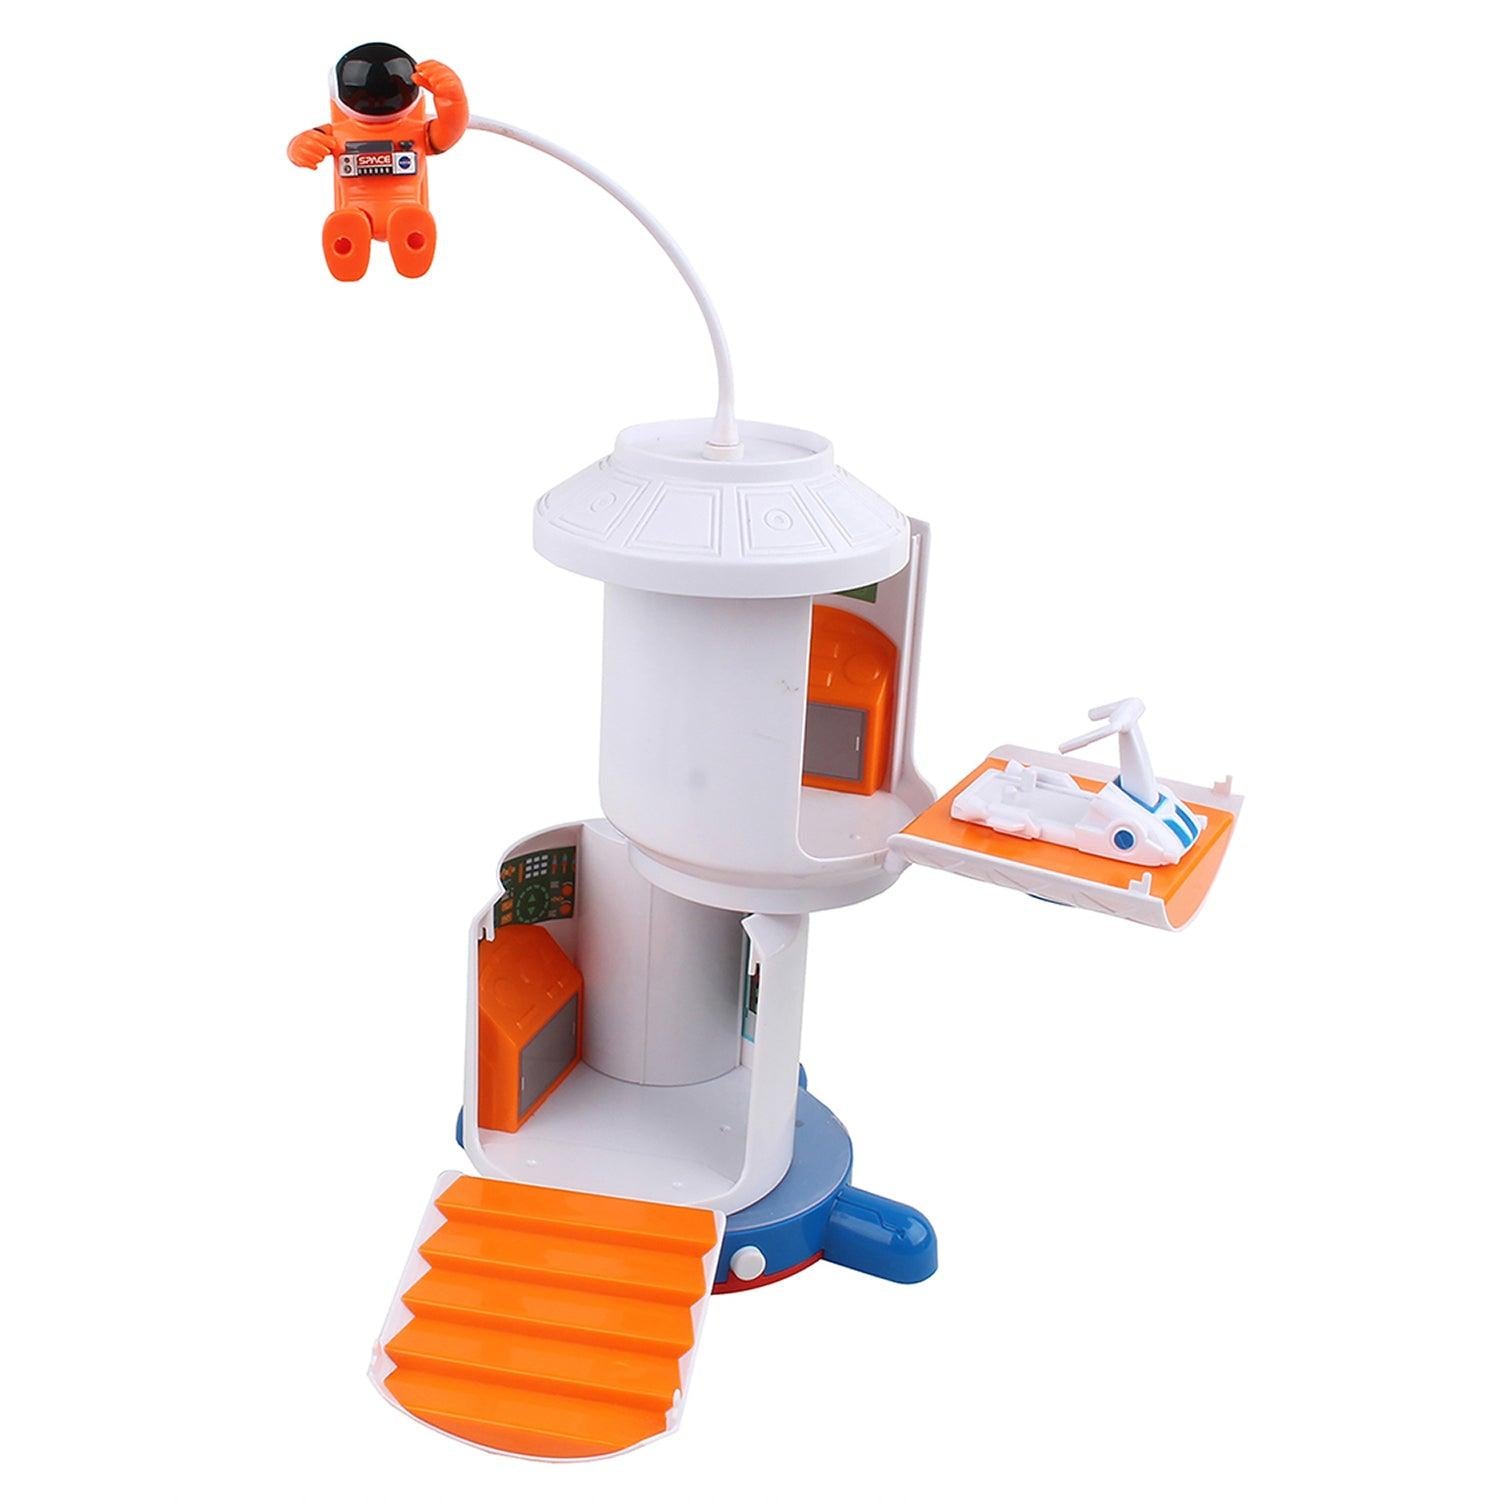 Space Adventure Space Station Set - Play - Science Museum Shop